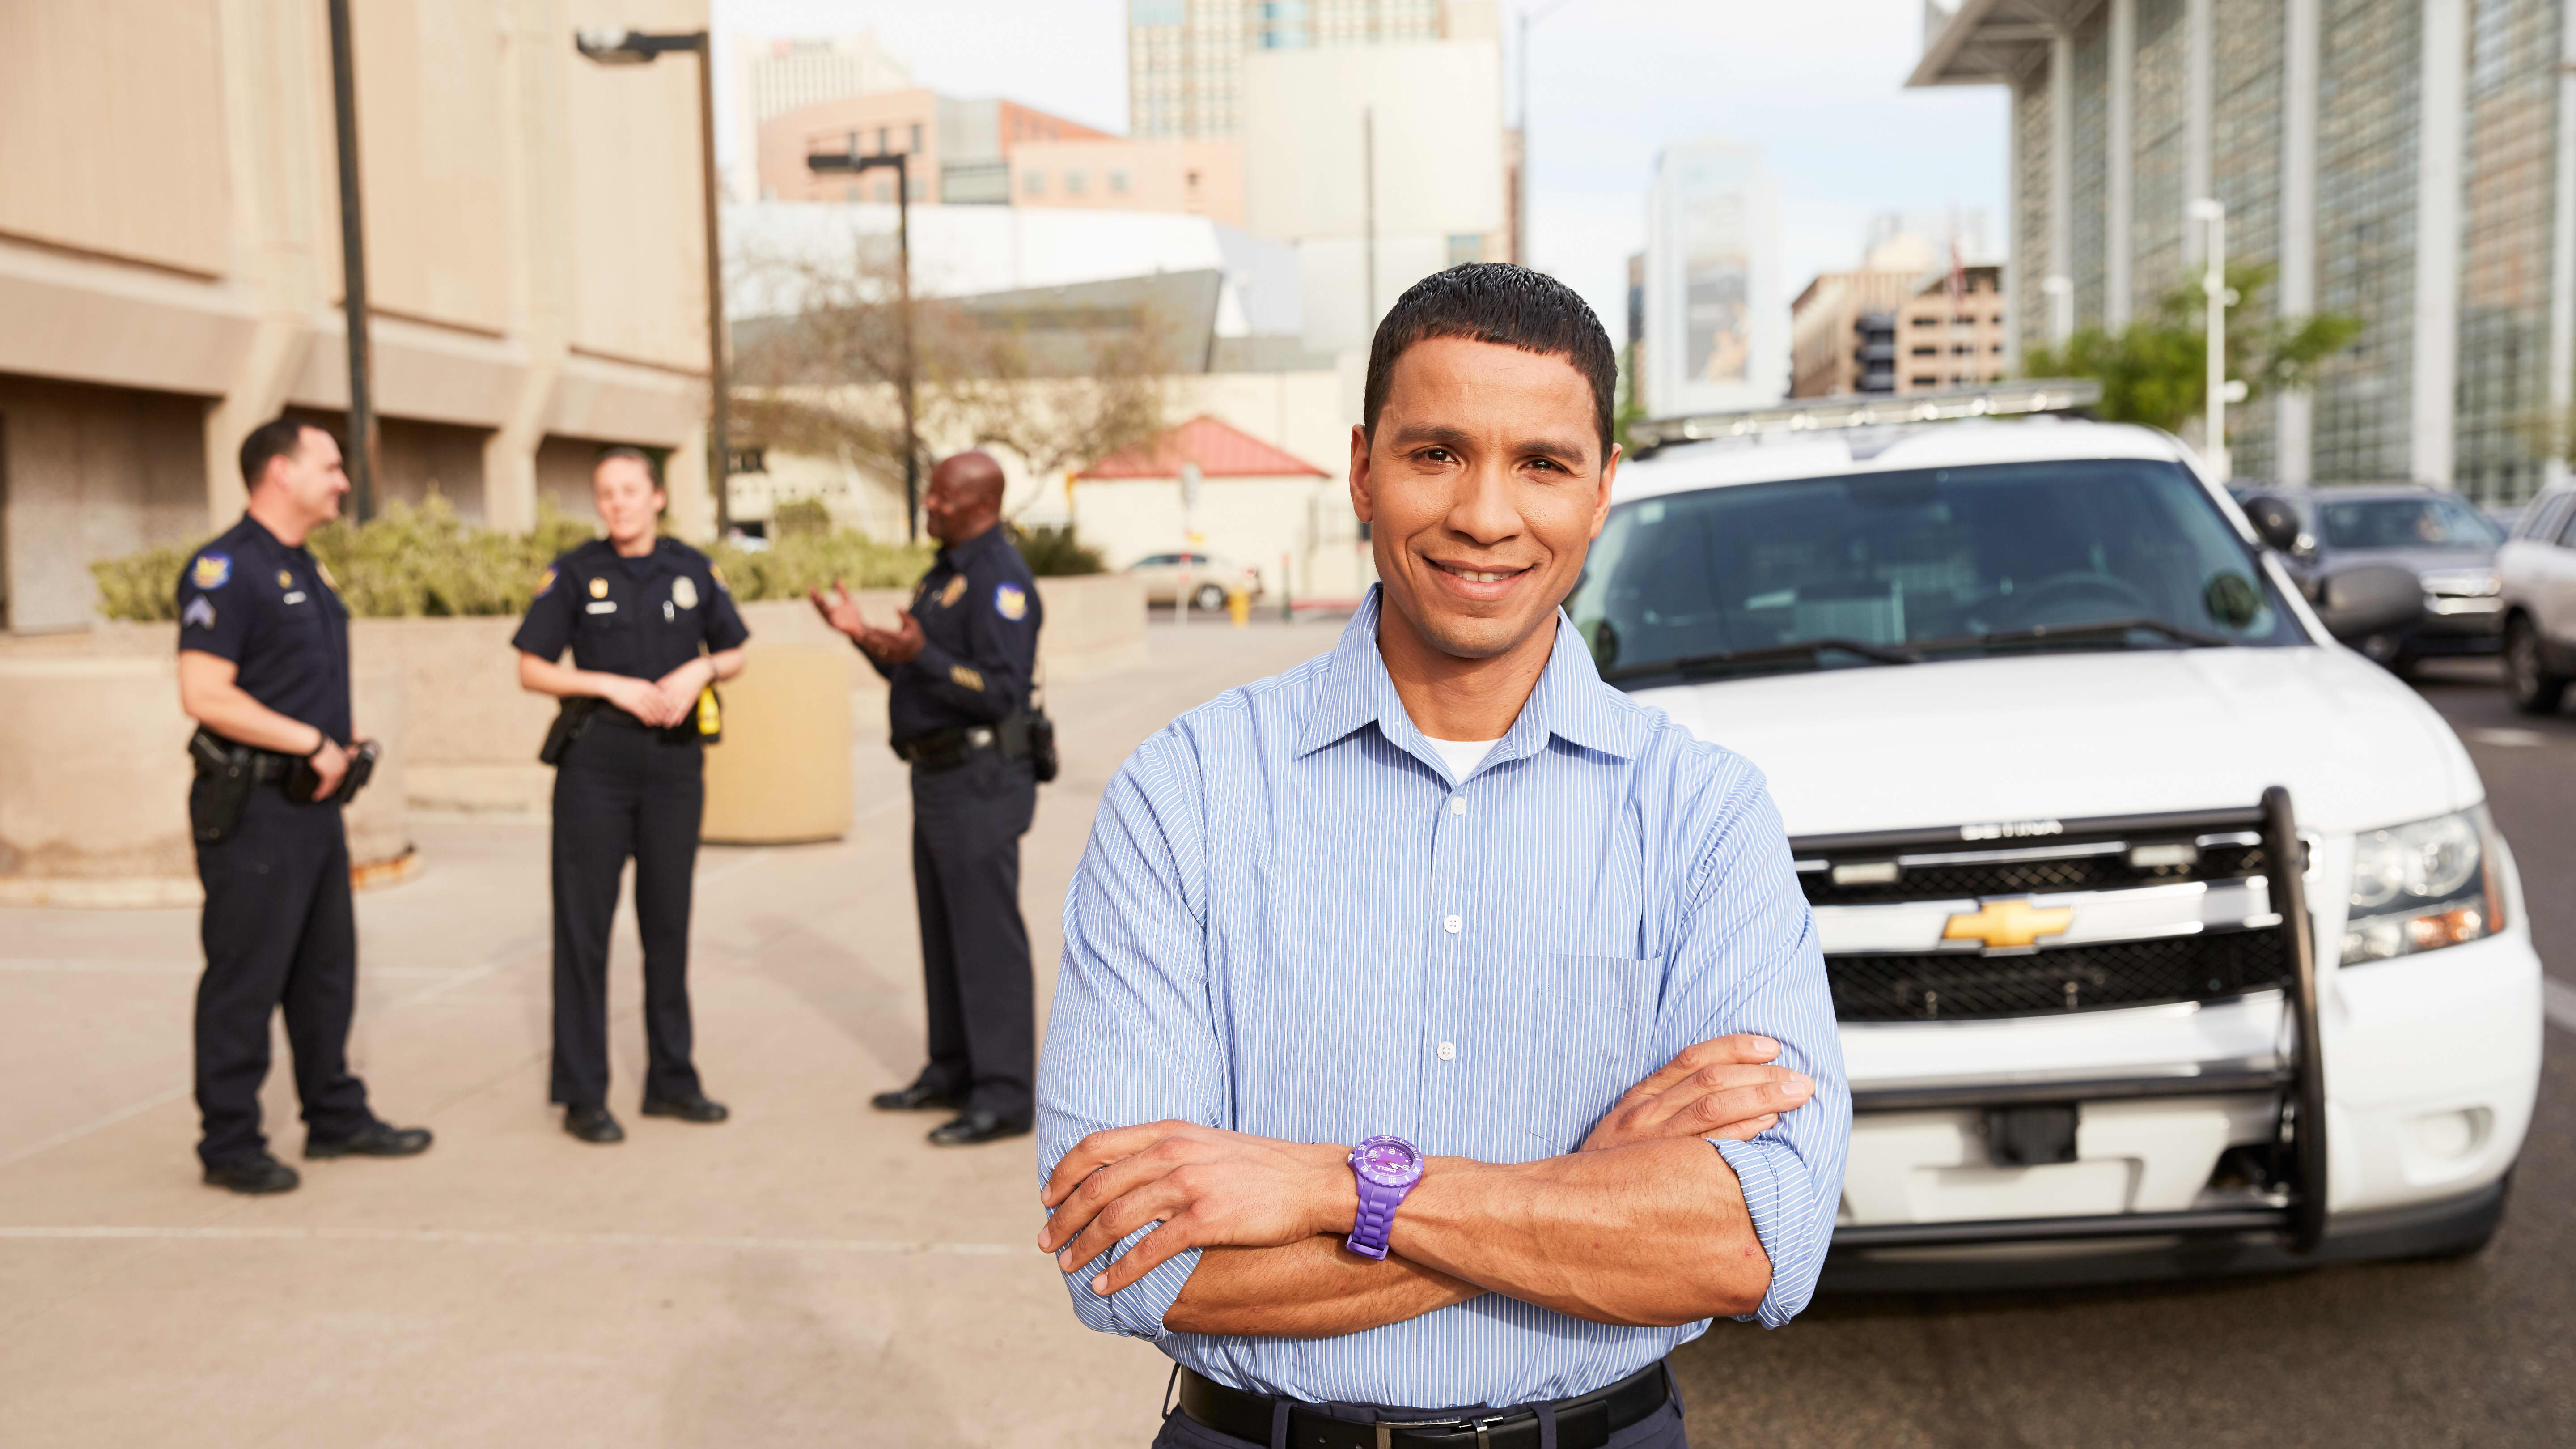 Legal studies degree graduate smiling outside with police officers and car in background